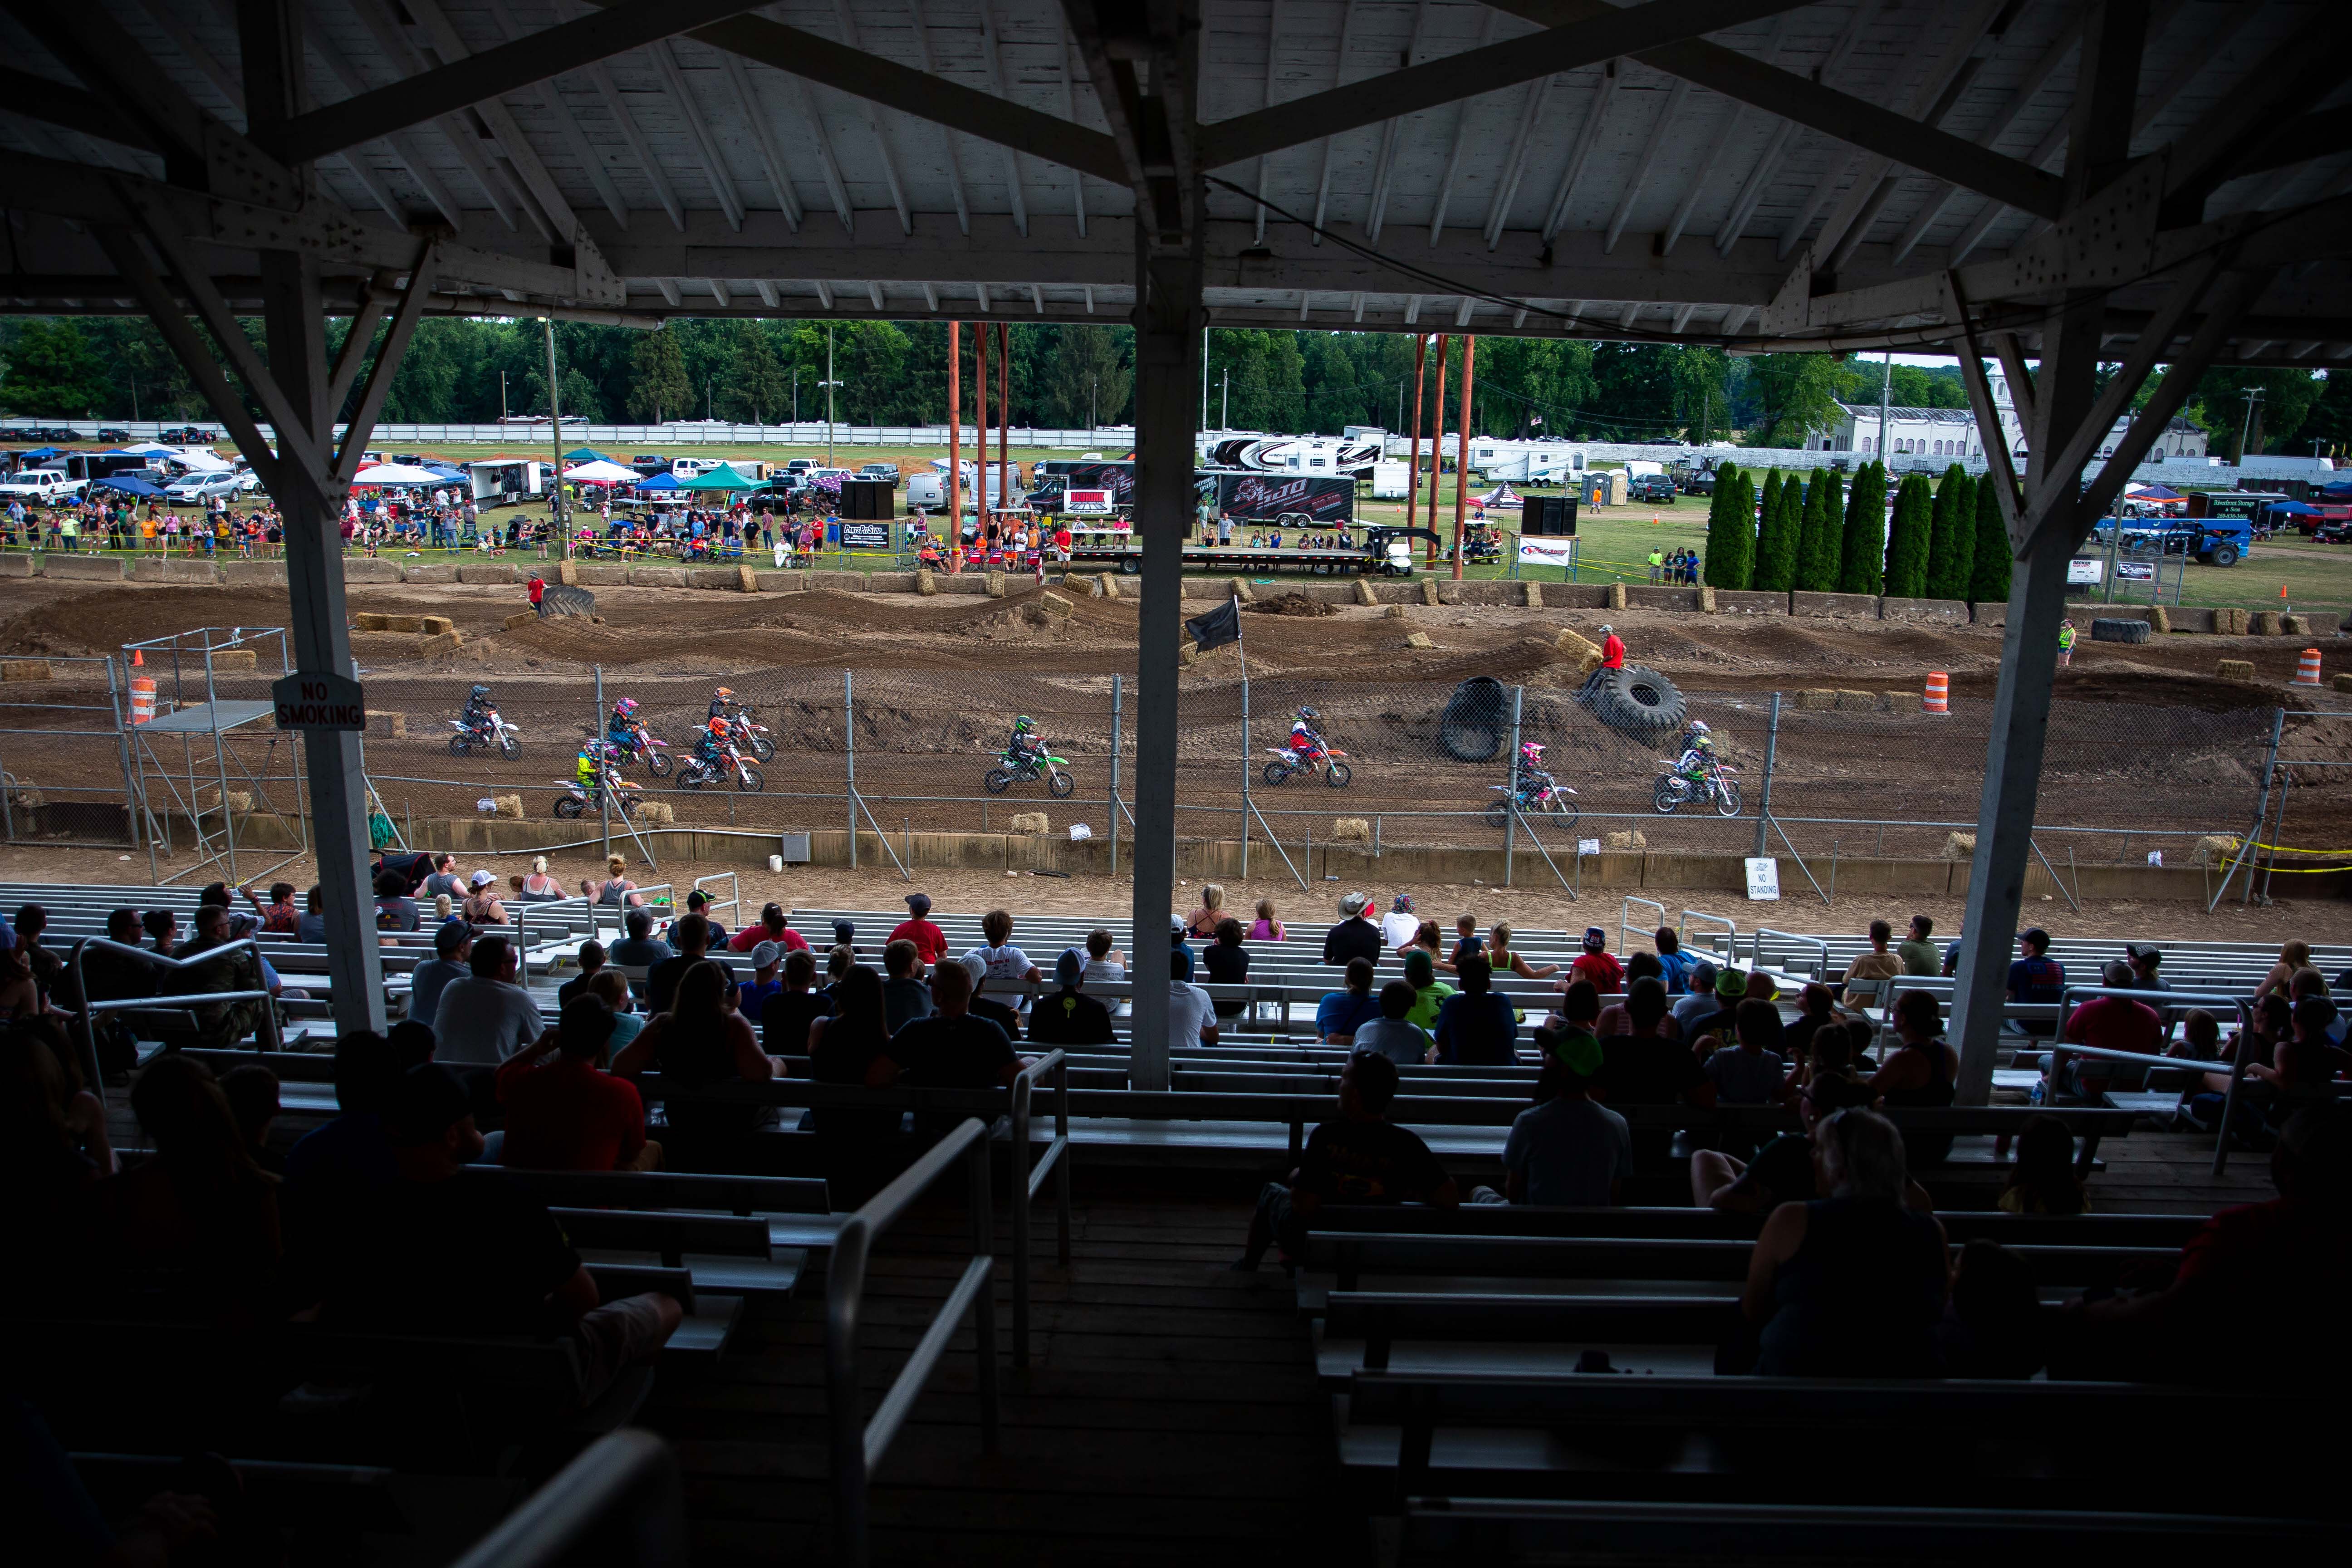 Motocross races bring crowds to the grand stands of the Ionia Free Fair Tuesday, July 19, 2022. The event brought riders of all ages to race around the dirt track. 